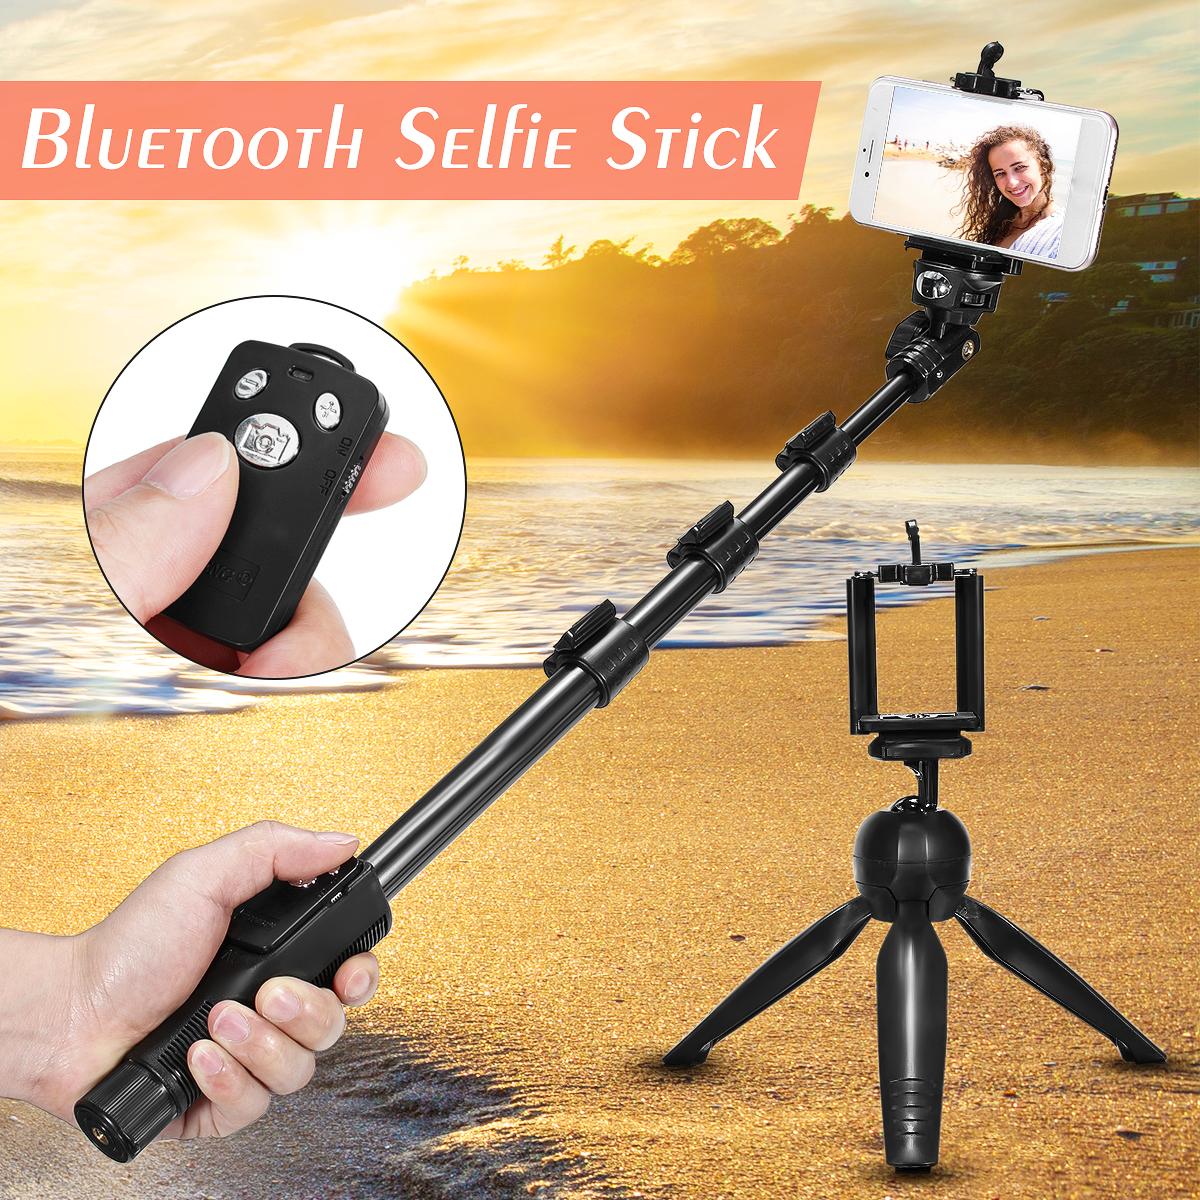 bluetooth-Wireless-Remote-Control-Extendable-Handheld-Selfie-Stick-Monopod--Tripod-for-Camera-Mobile-1340611-2